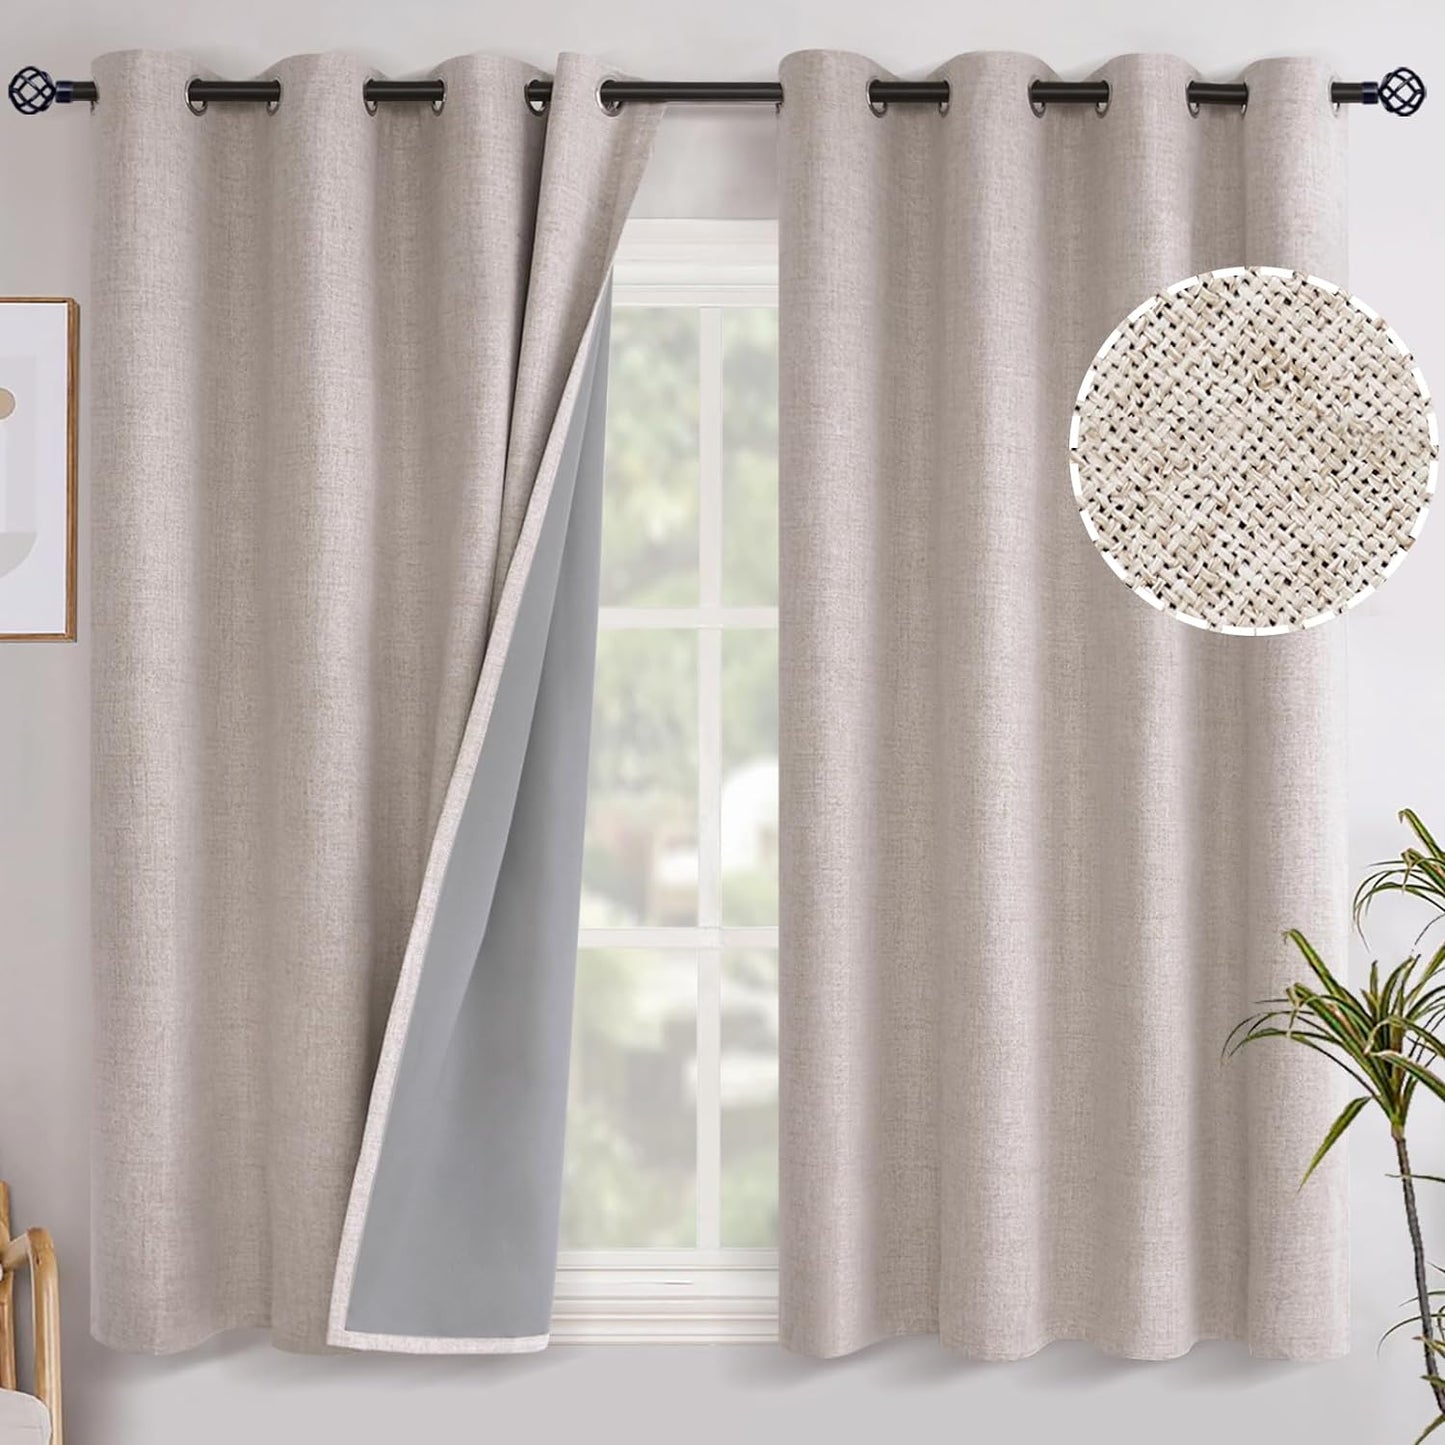 Youngstex Linen Blackout Curtains 63 Inch Length, Grommet Darkening Bedroom Curtains Burlap Linen Window Drapes Thermal Insulated for Basement Summer Heat, 2 Panels, 52 X 63 Inch, Beige  YoungsTex Beige 52W X 45L 